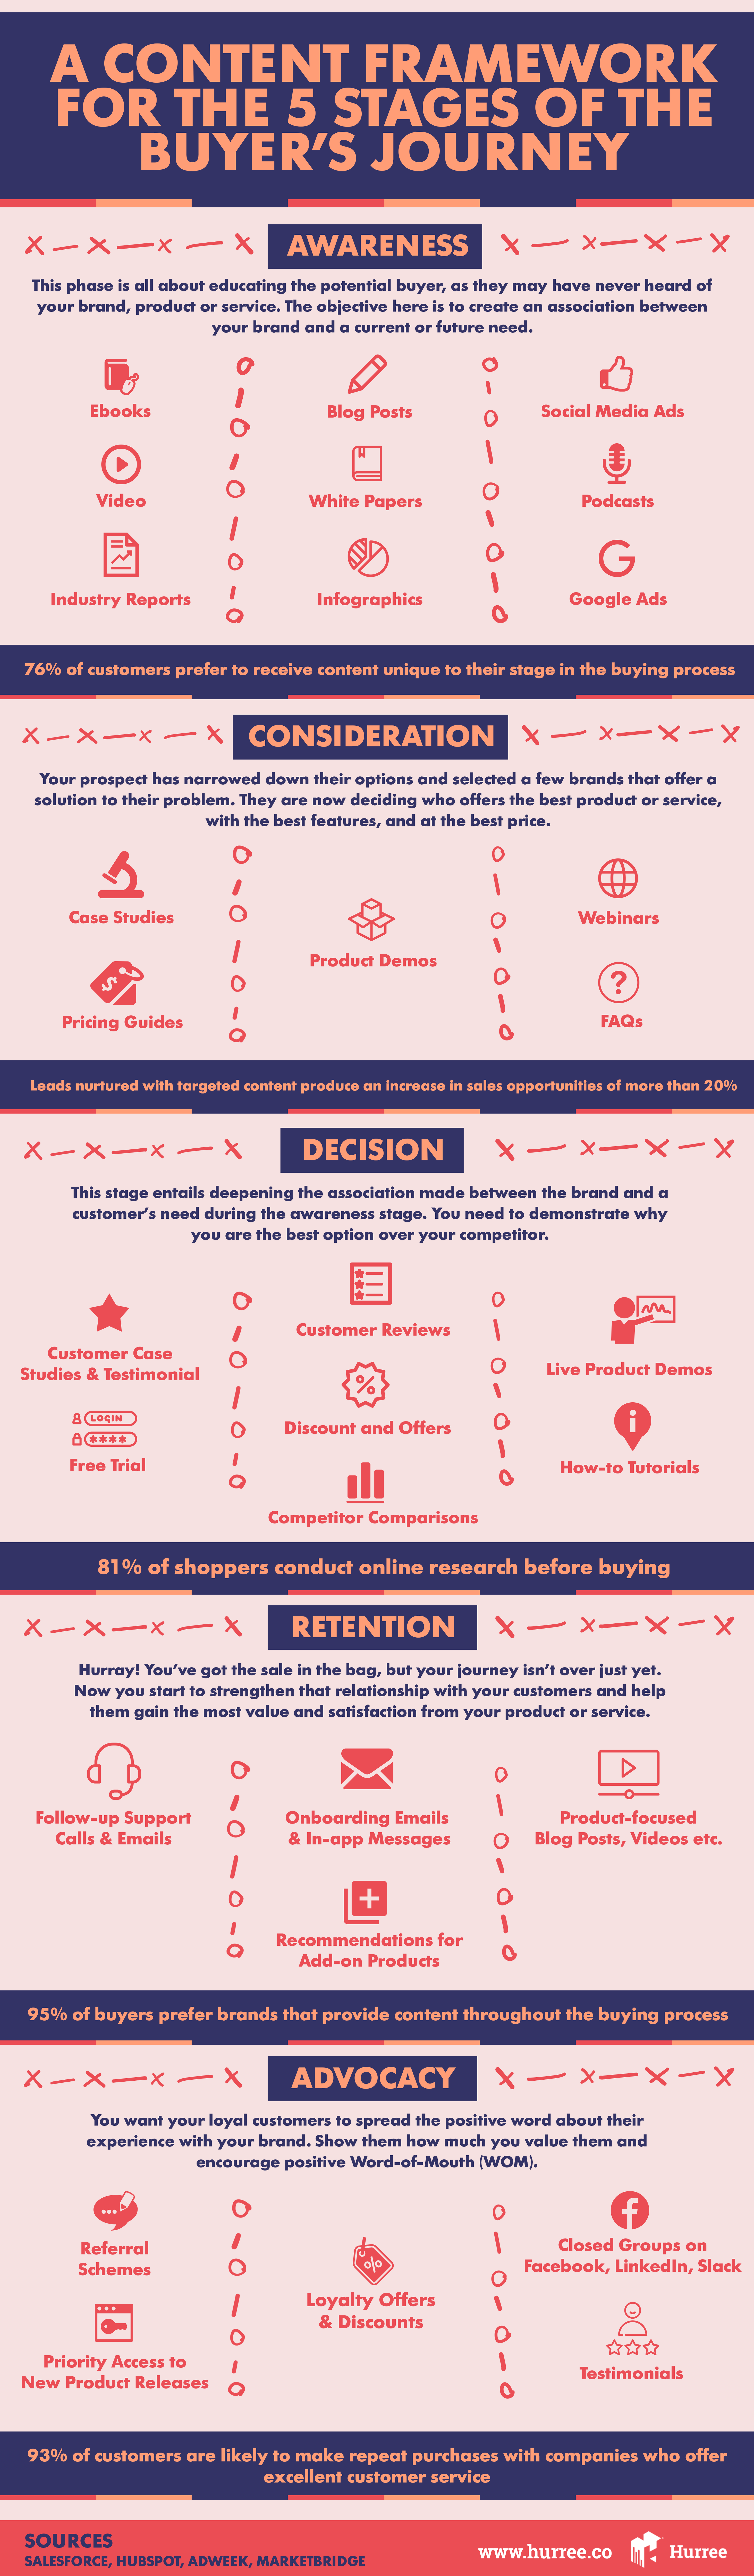 Content-Framework-5-Stages-Buyers-Journey-Infographic